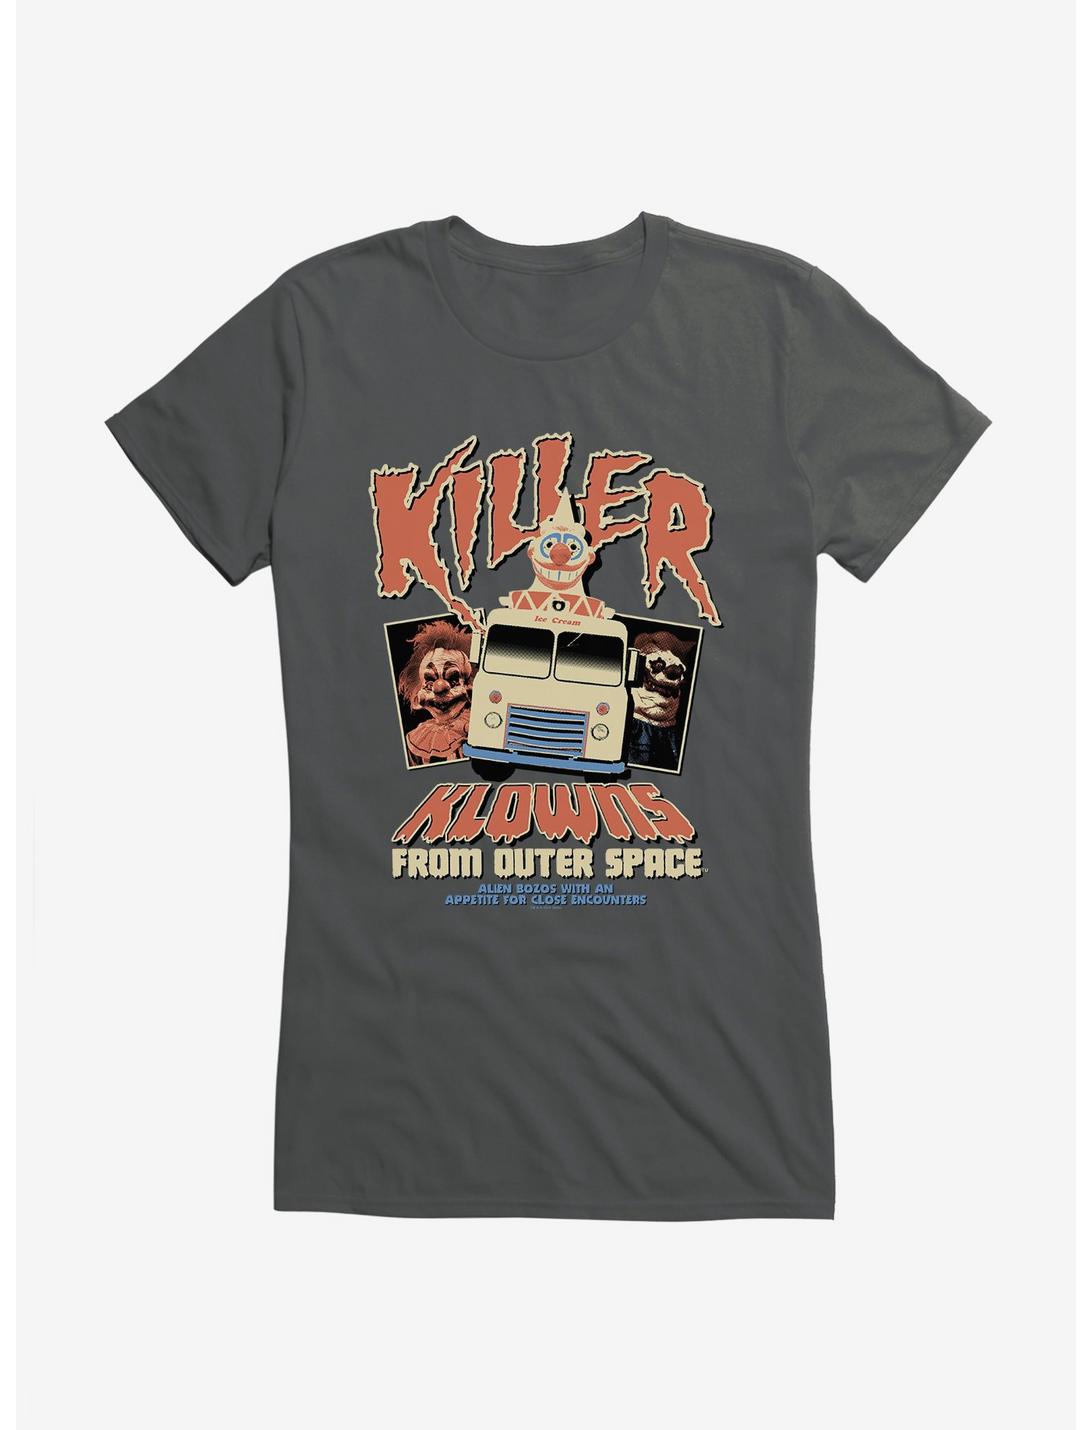 Killer Klowns From Outer Space Vintage Movie Poster Girls T-Shirt, , hi-res